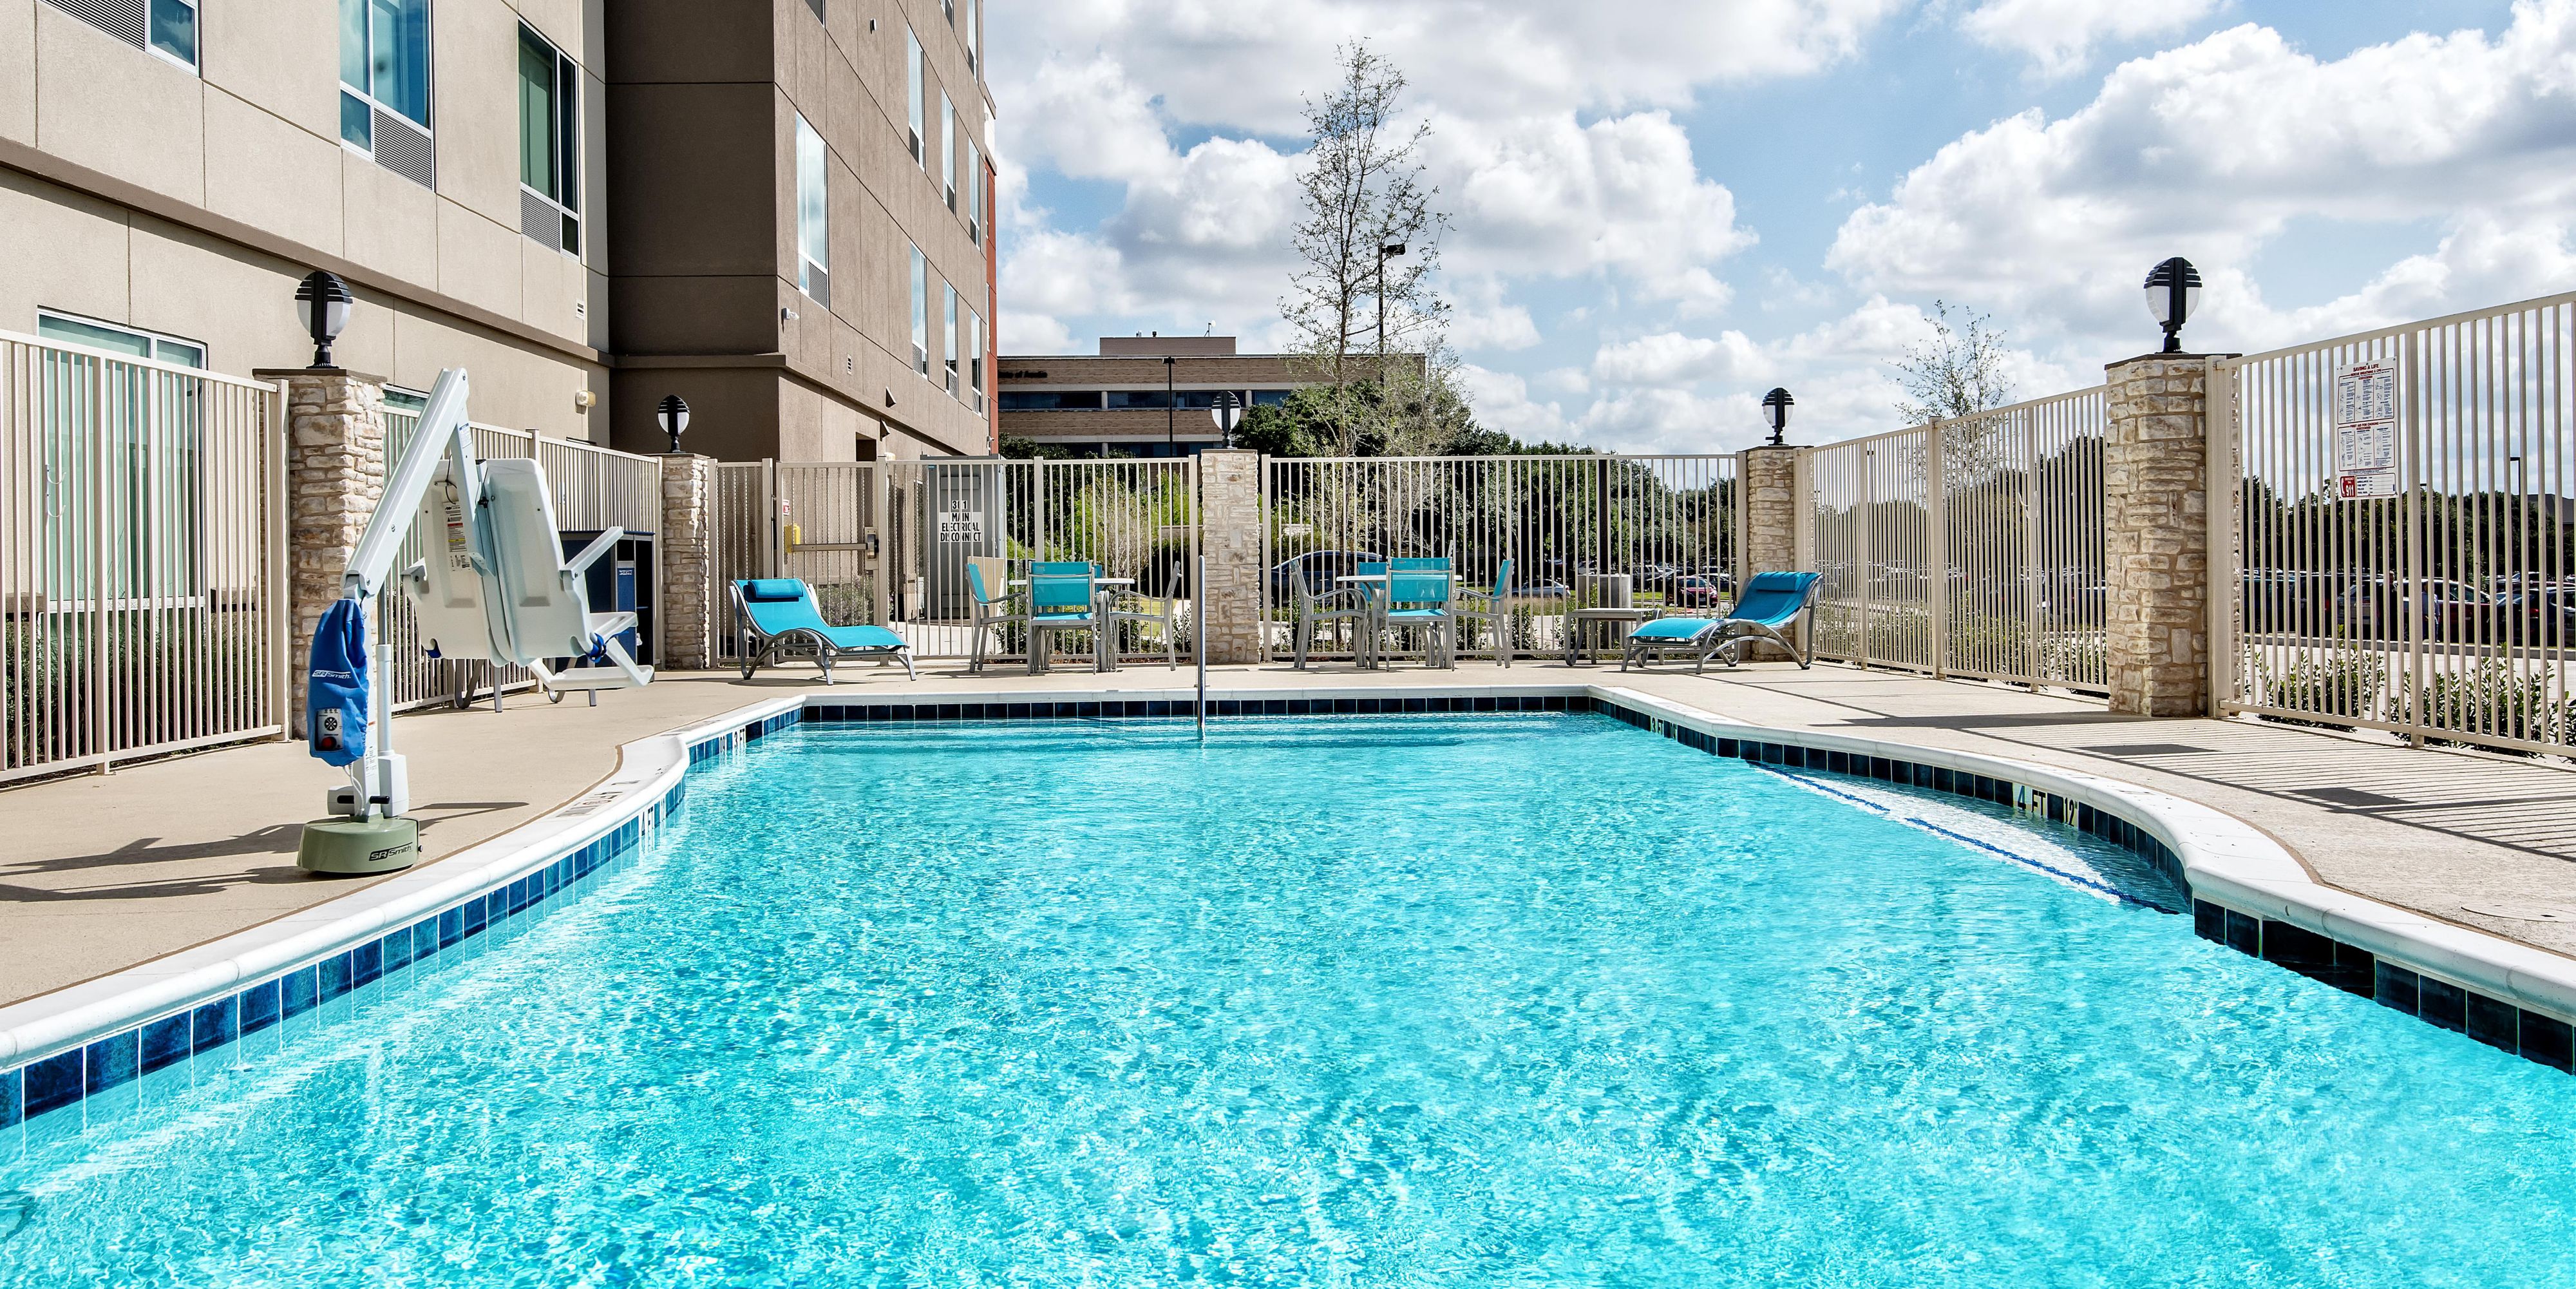 Feel at home with our amenities including a Fitness Center, Business Center, and 24/7 Market which has drinks, snacks, frozen meals, and local gifts. Our outdoor pool is open through October from 10am-10pm so you can beat the heat and relax.